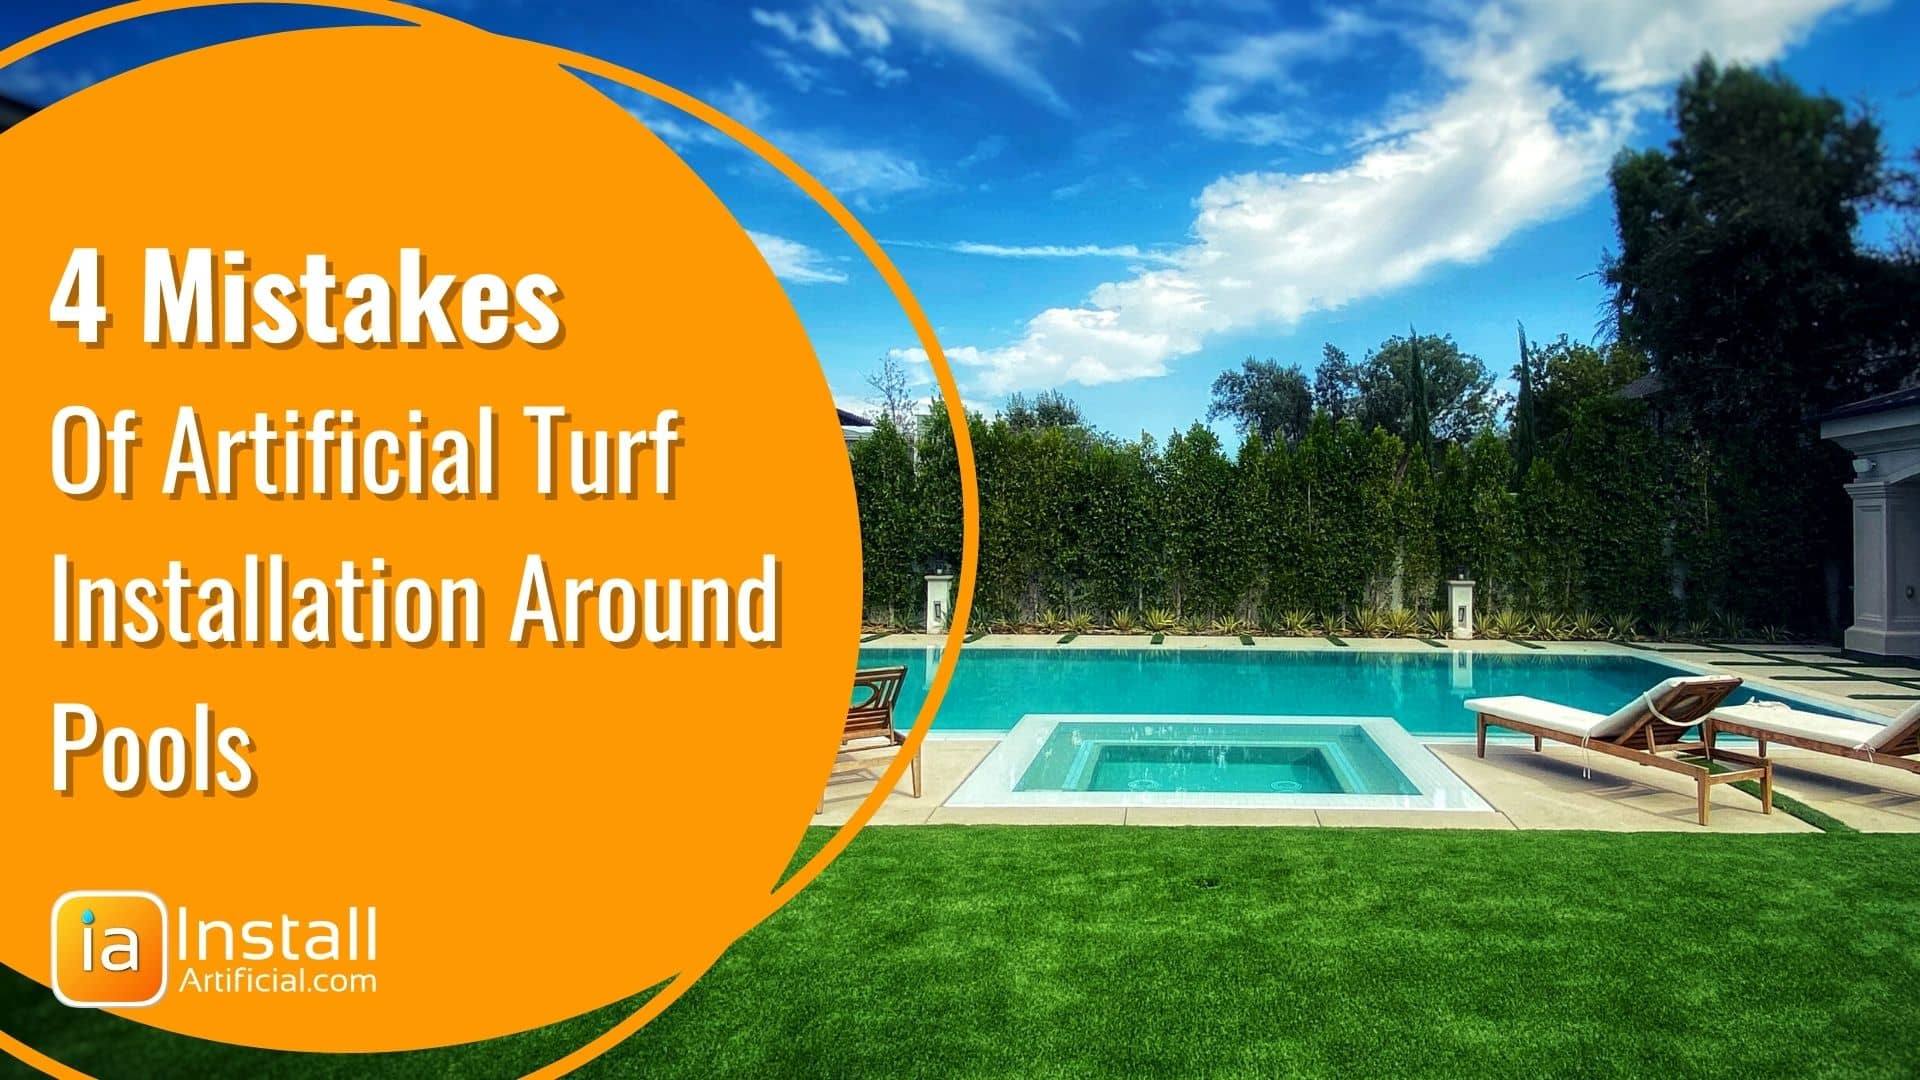 Artificial Turf Installation Around Pools - 4 Common Mistakes